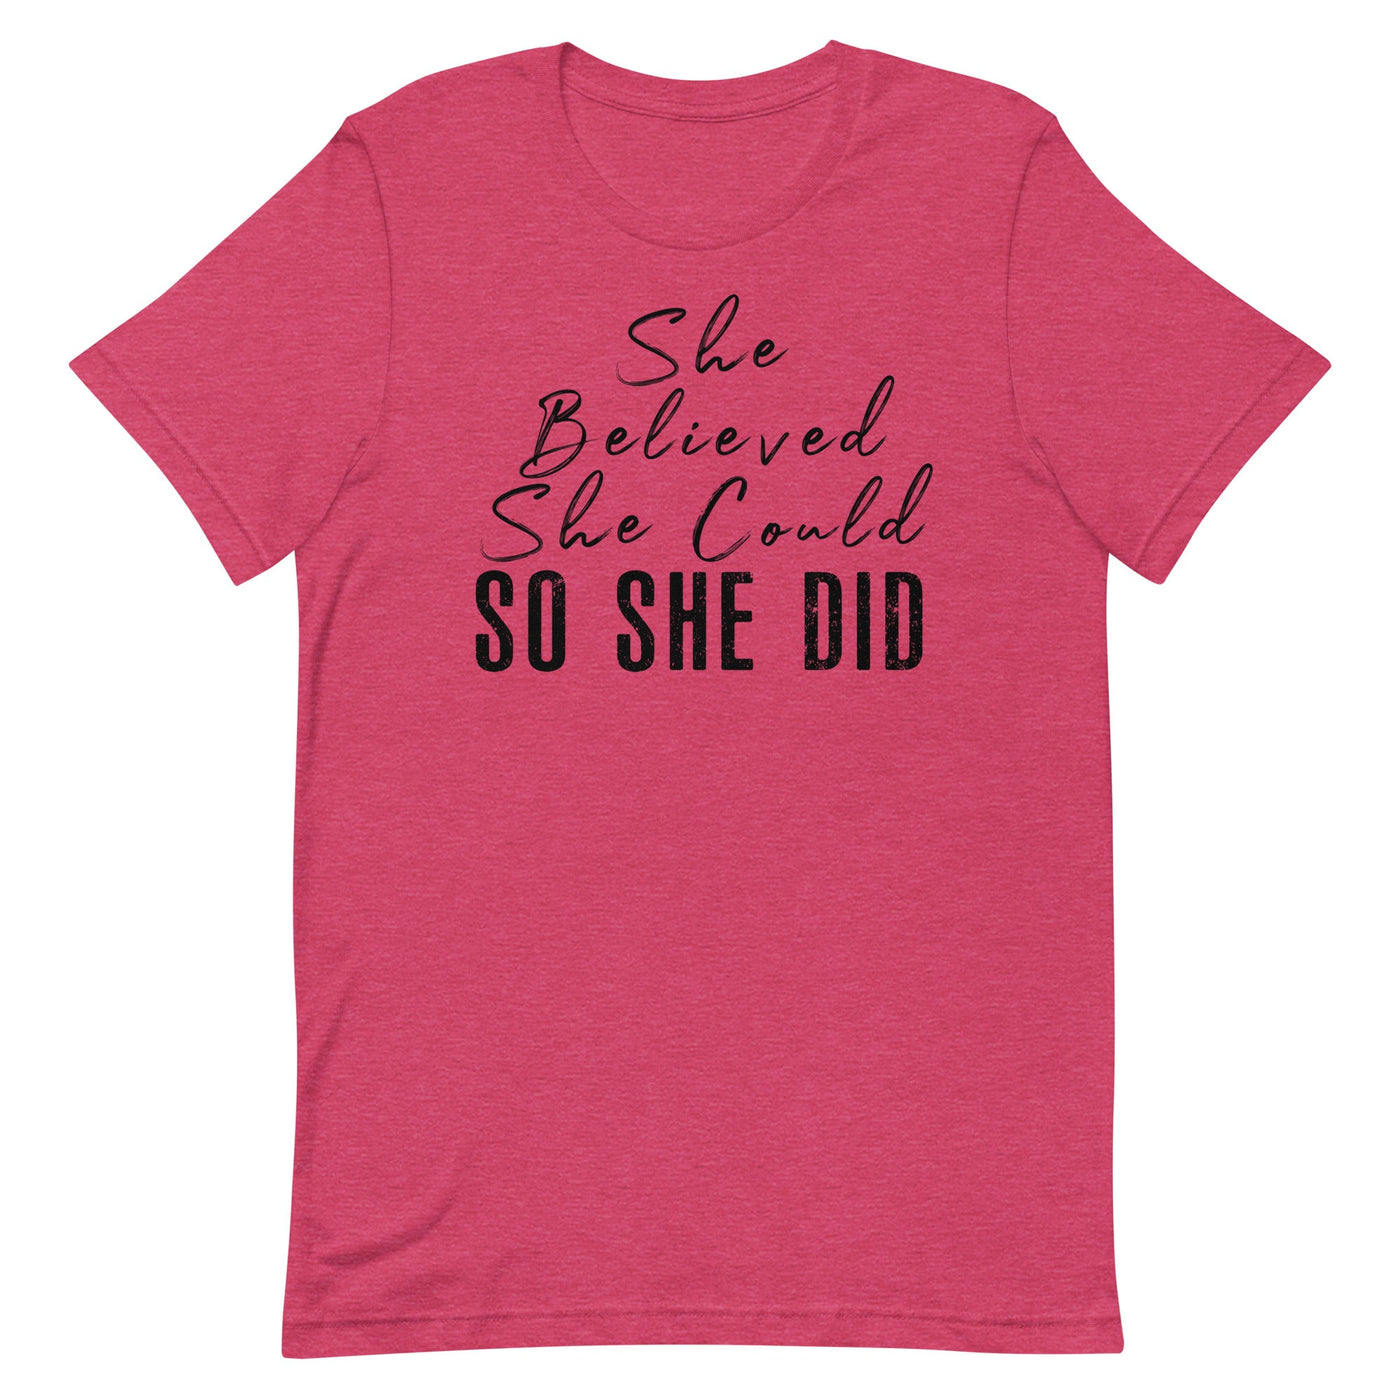 SHE BELIEVED SHE COULD SO SHE DID - BLACK FONT Heather Raspberry S 